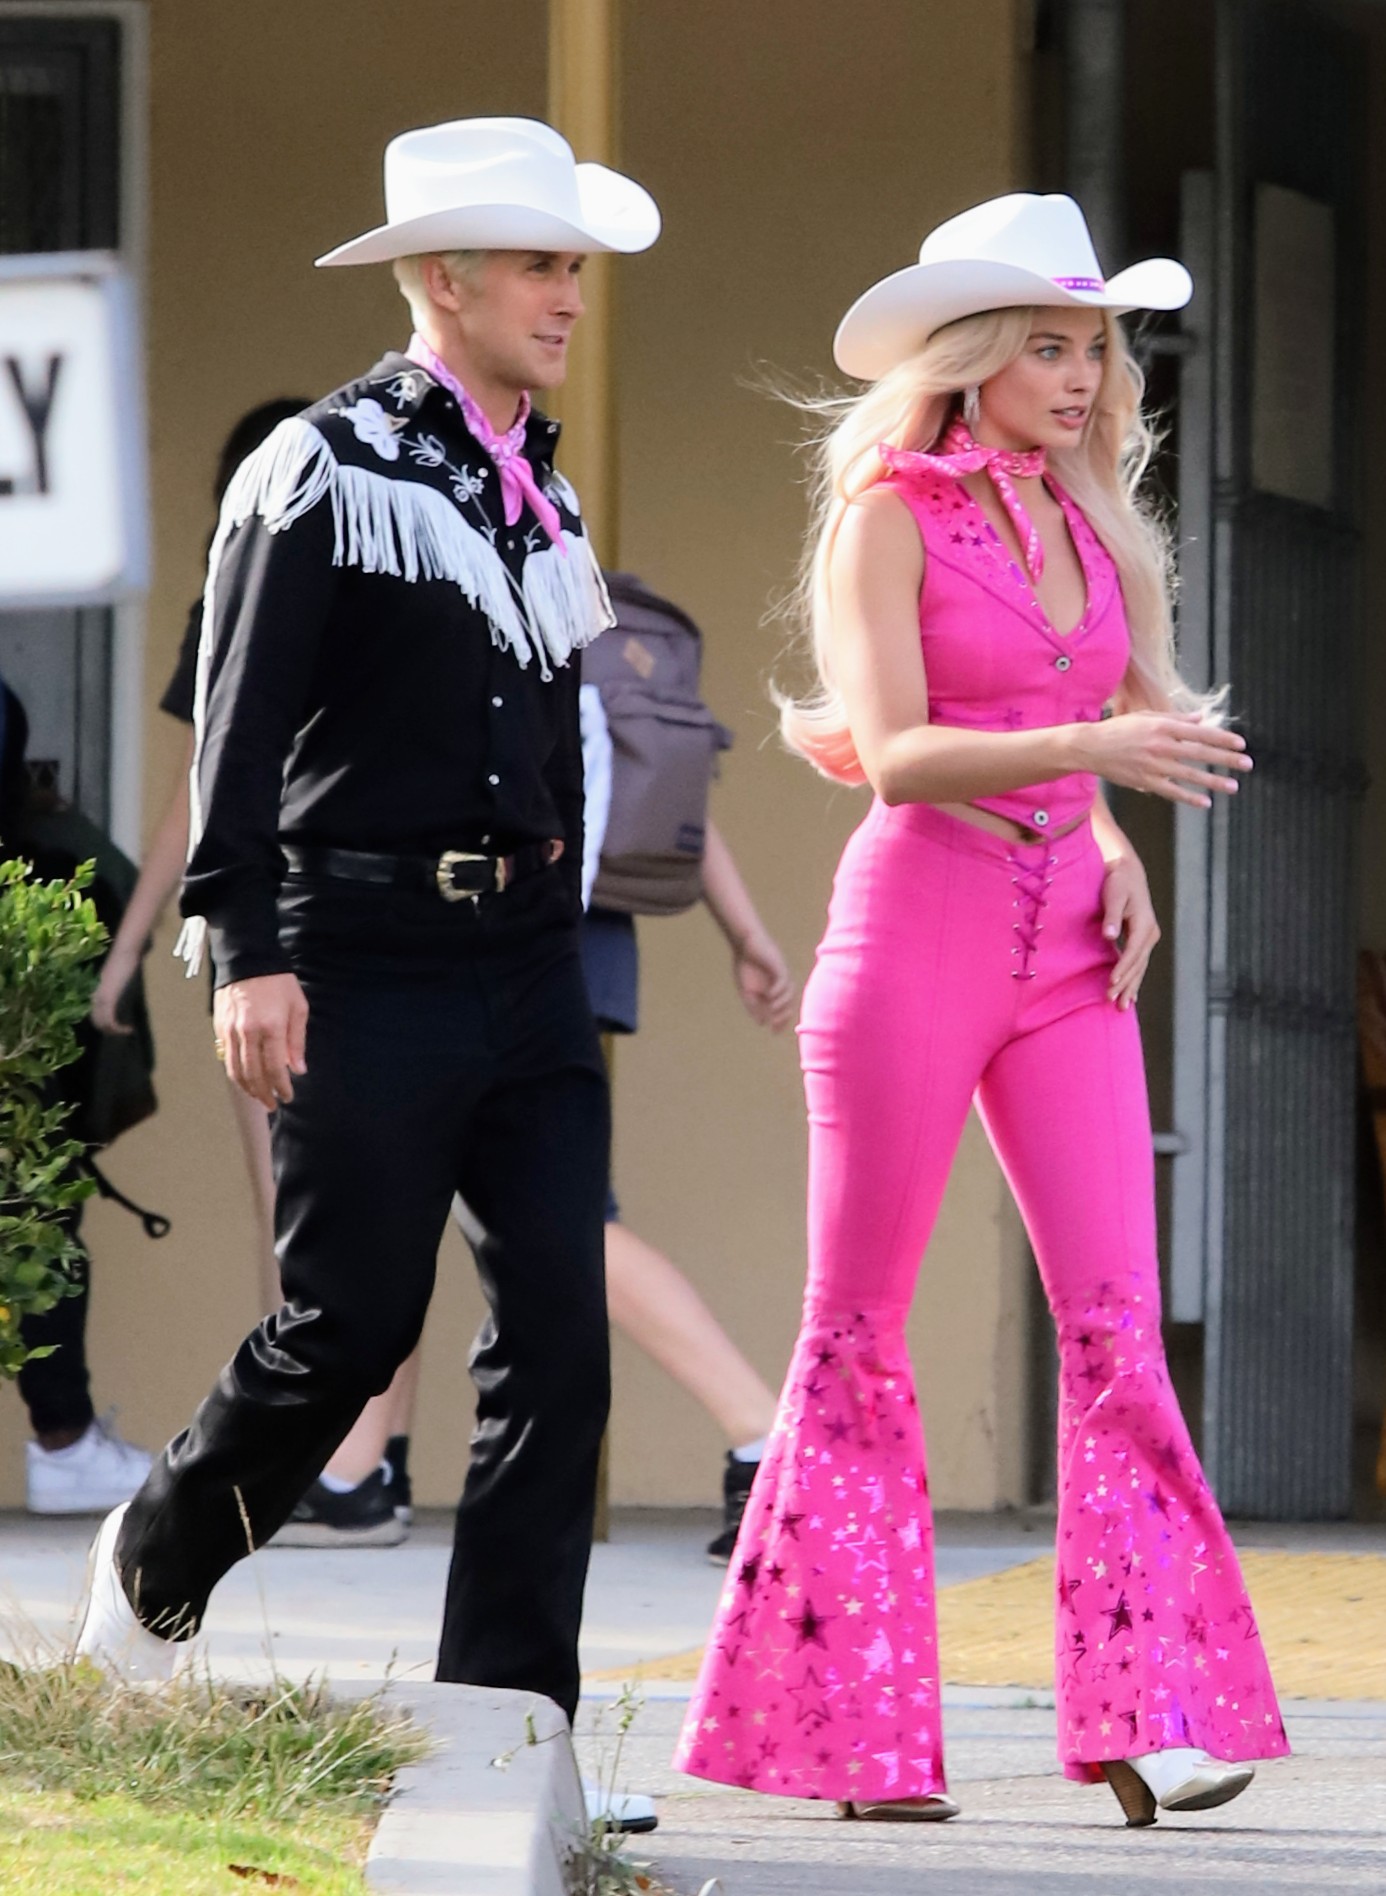 Barbie' Movie with Margot Robbie Release Date, Cast, and News